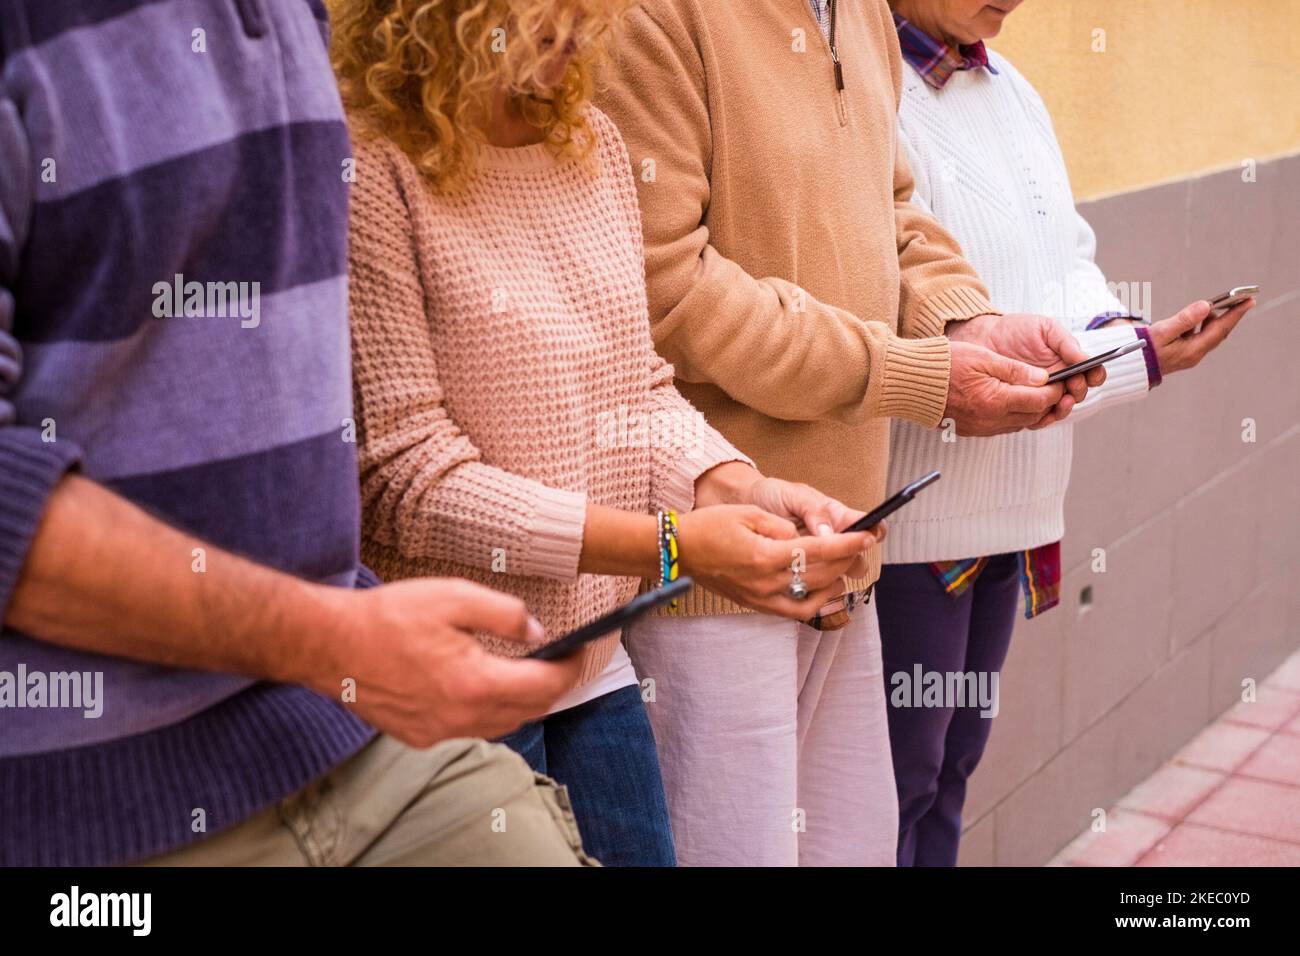 close up and portrait of four people using their phones together in the street chatting or texting and surfing on the net - social media and network concept annd addicted lifestyle Stock Photo